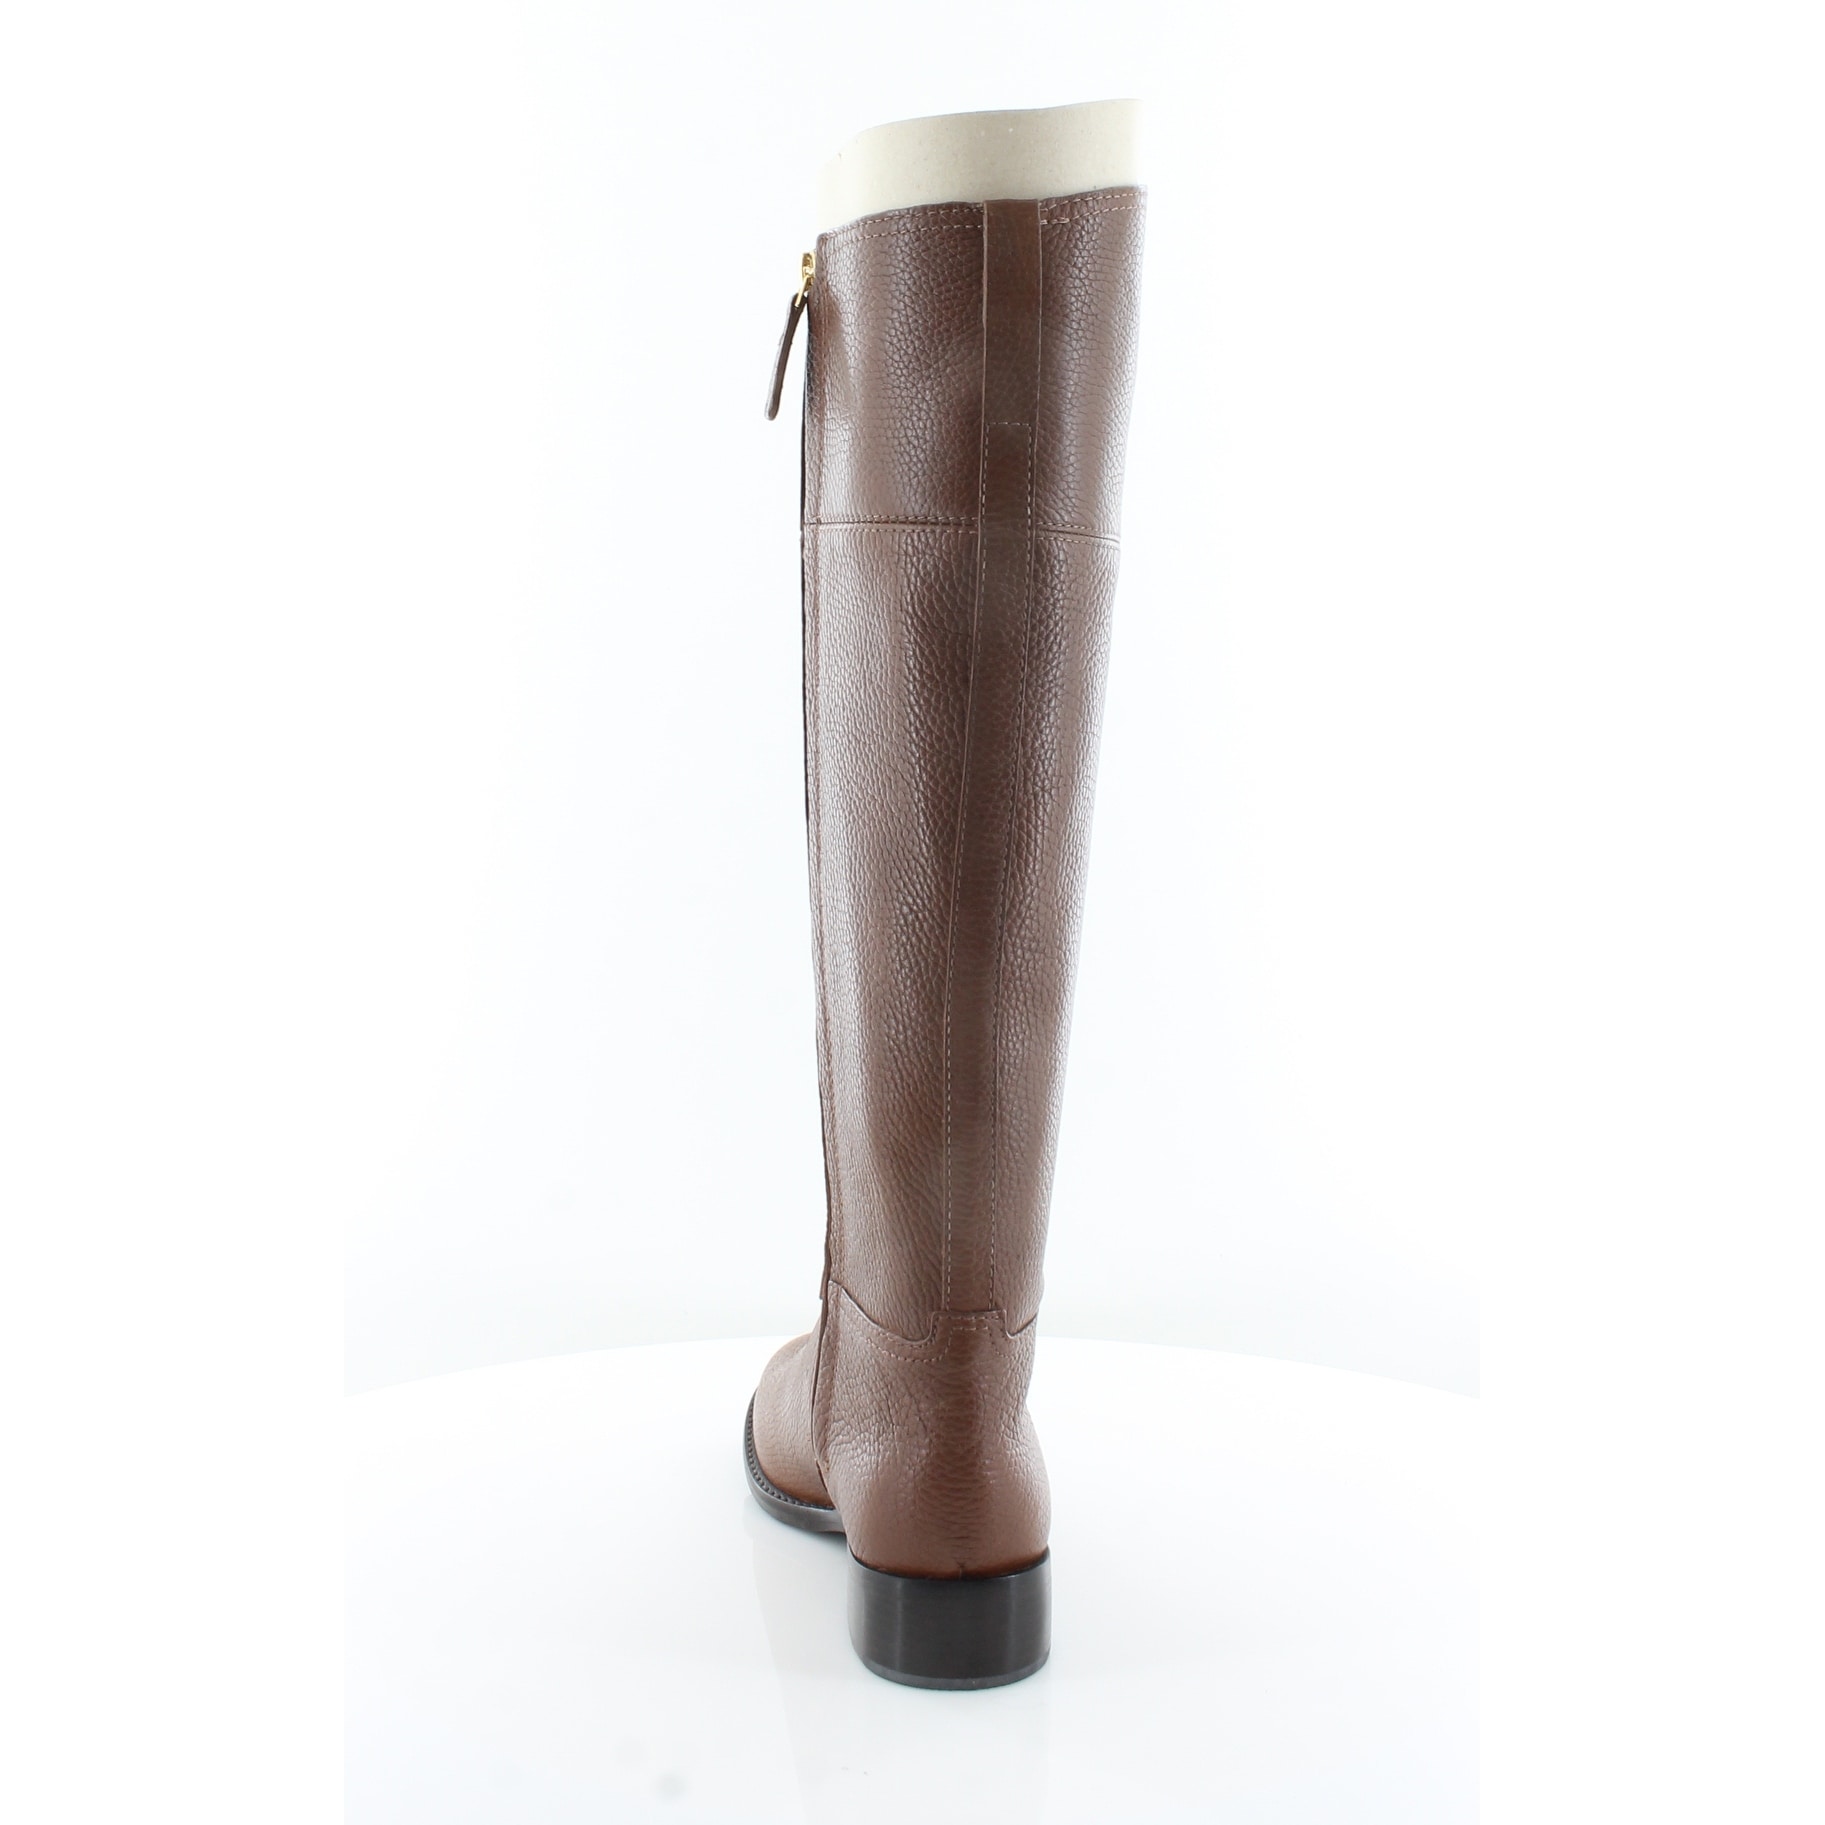 tory burch junction riding boots